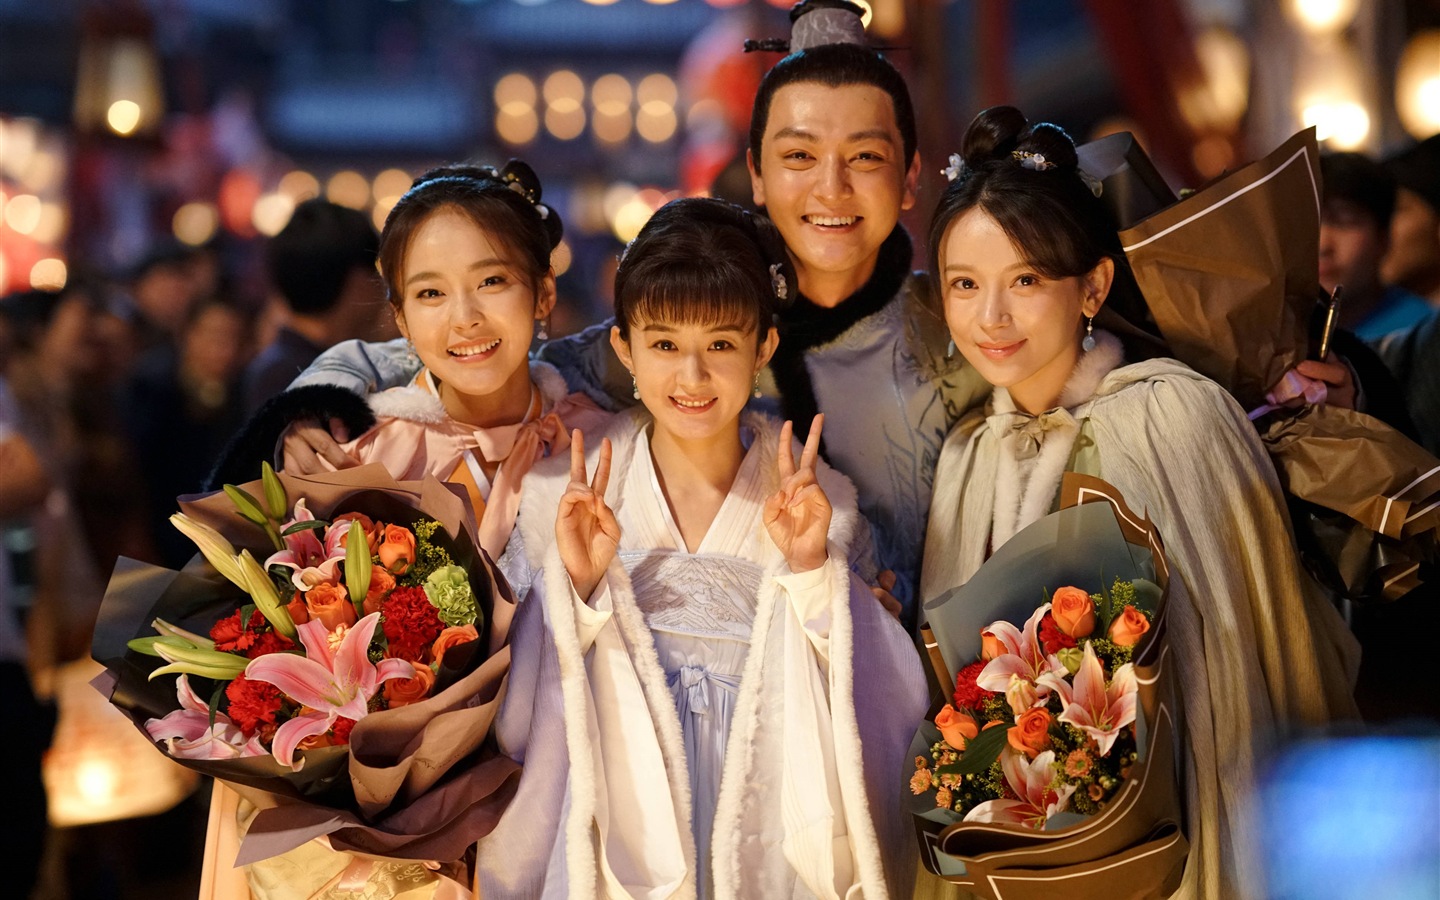 The Story Of MingLan, TV series HD wallpapers #48 - 1440x900